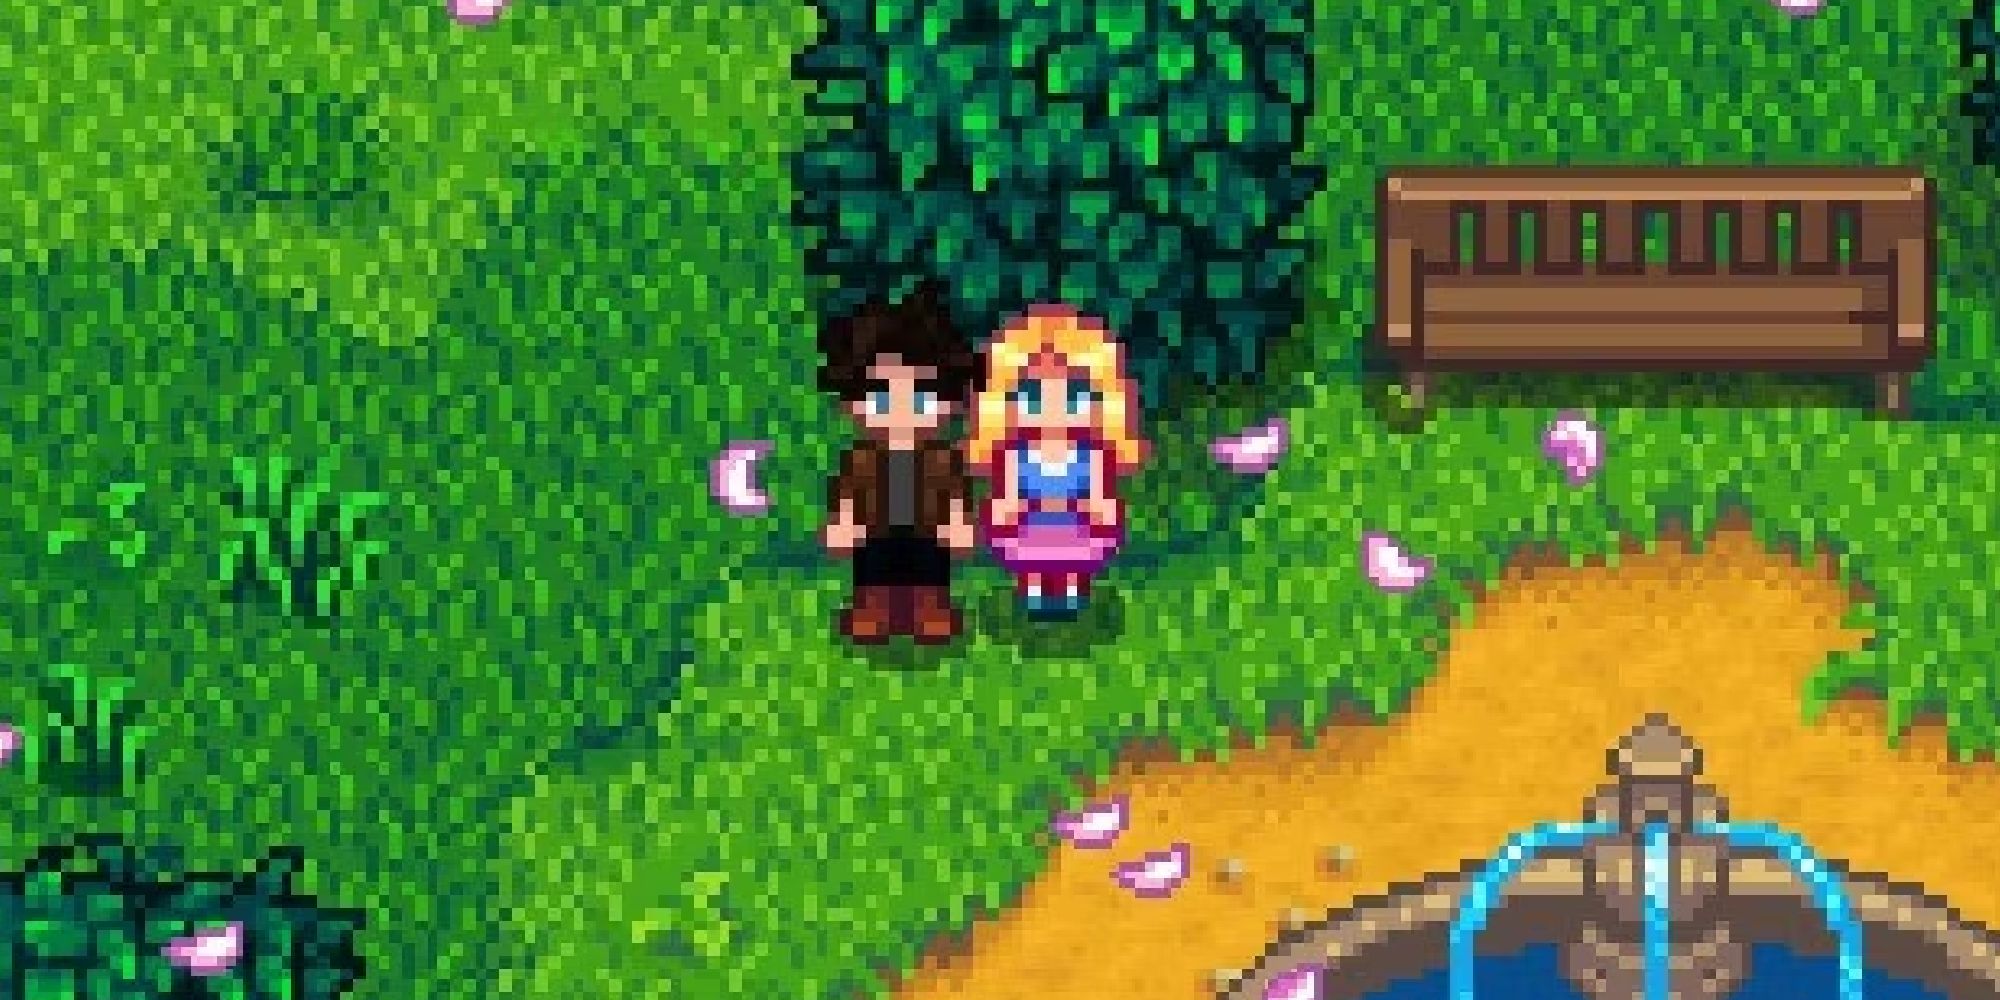 stardew valley haley and player near water fountain